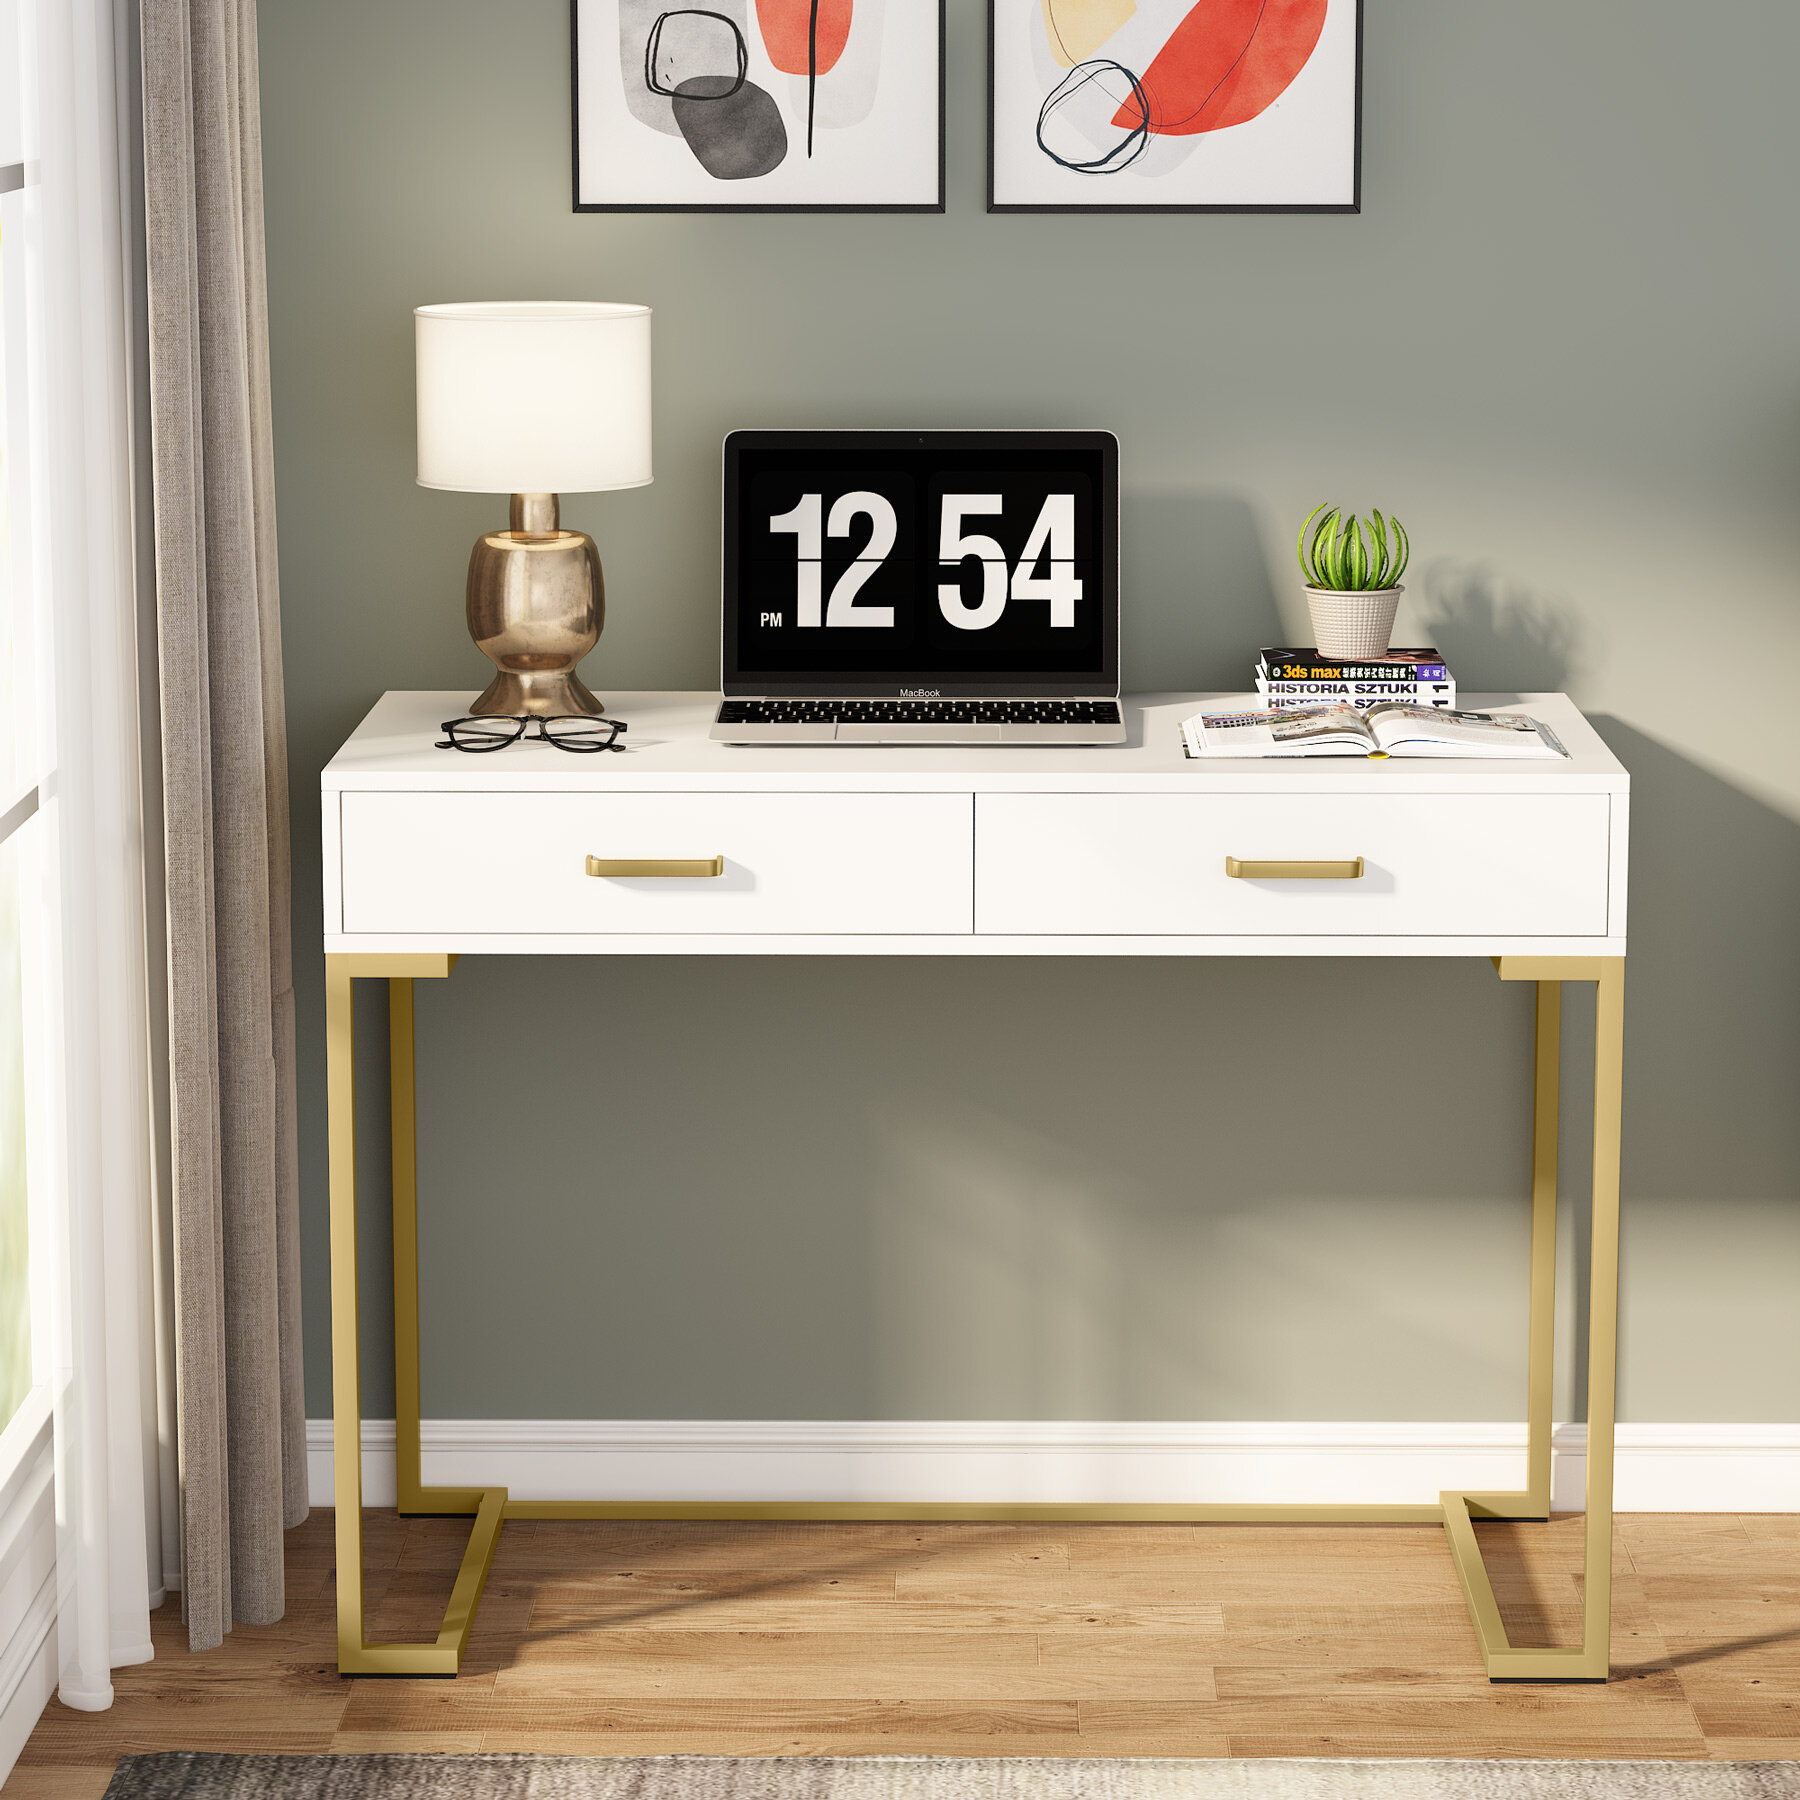 Secil Modern Desk with 2 Drawers Everly Quinn Color: Gold, Size: 29.9 H x 41.7 L x 19.7 W